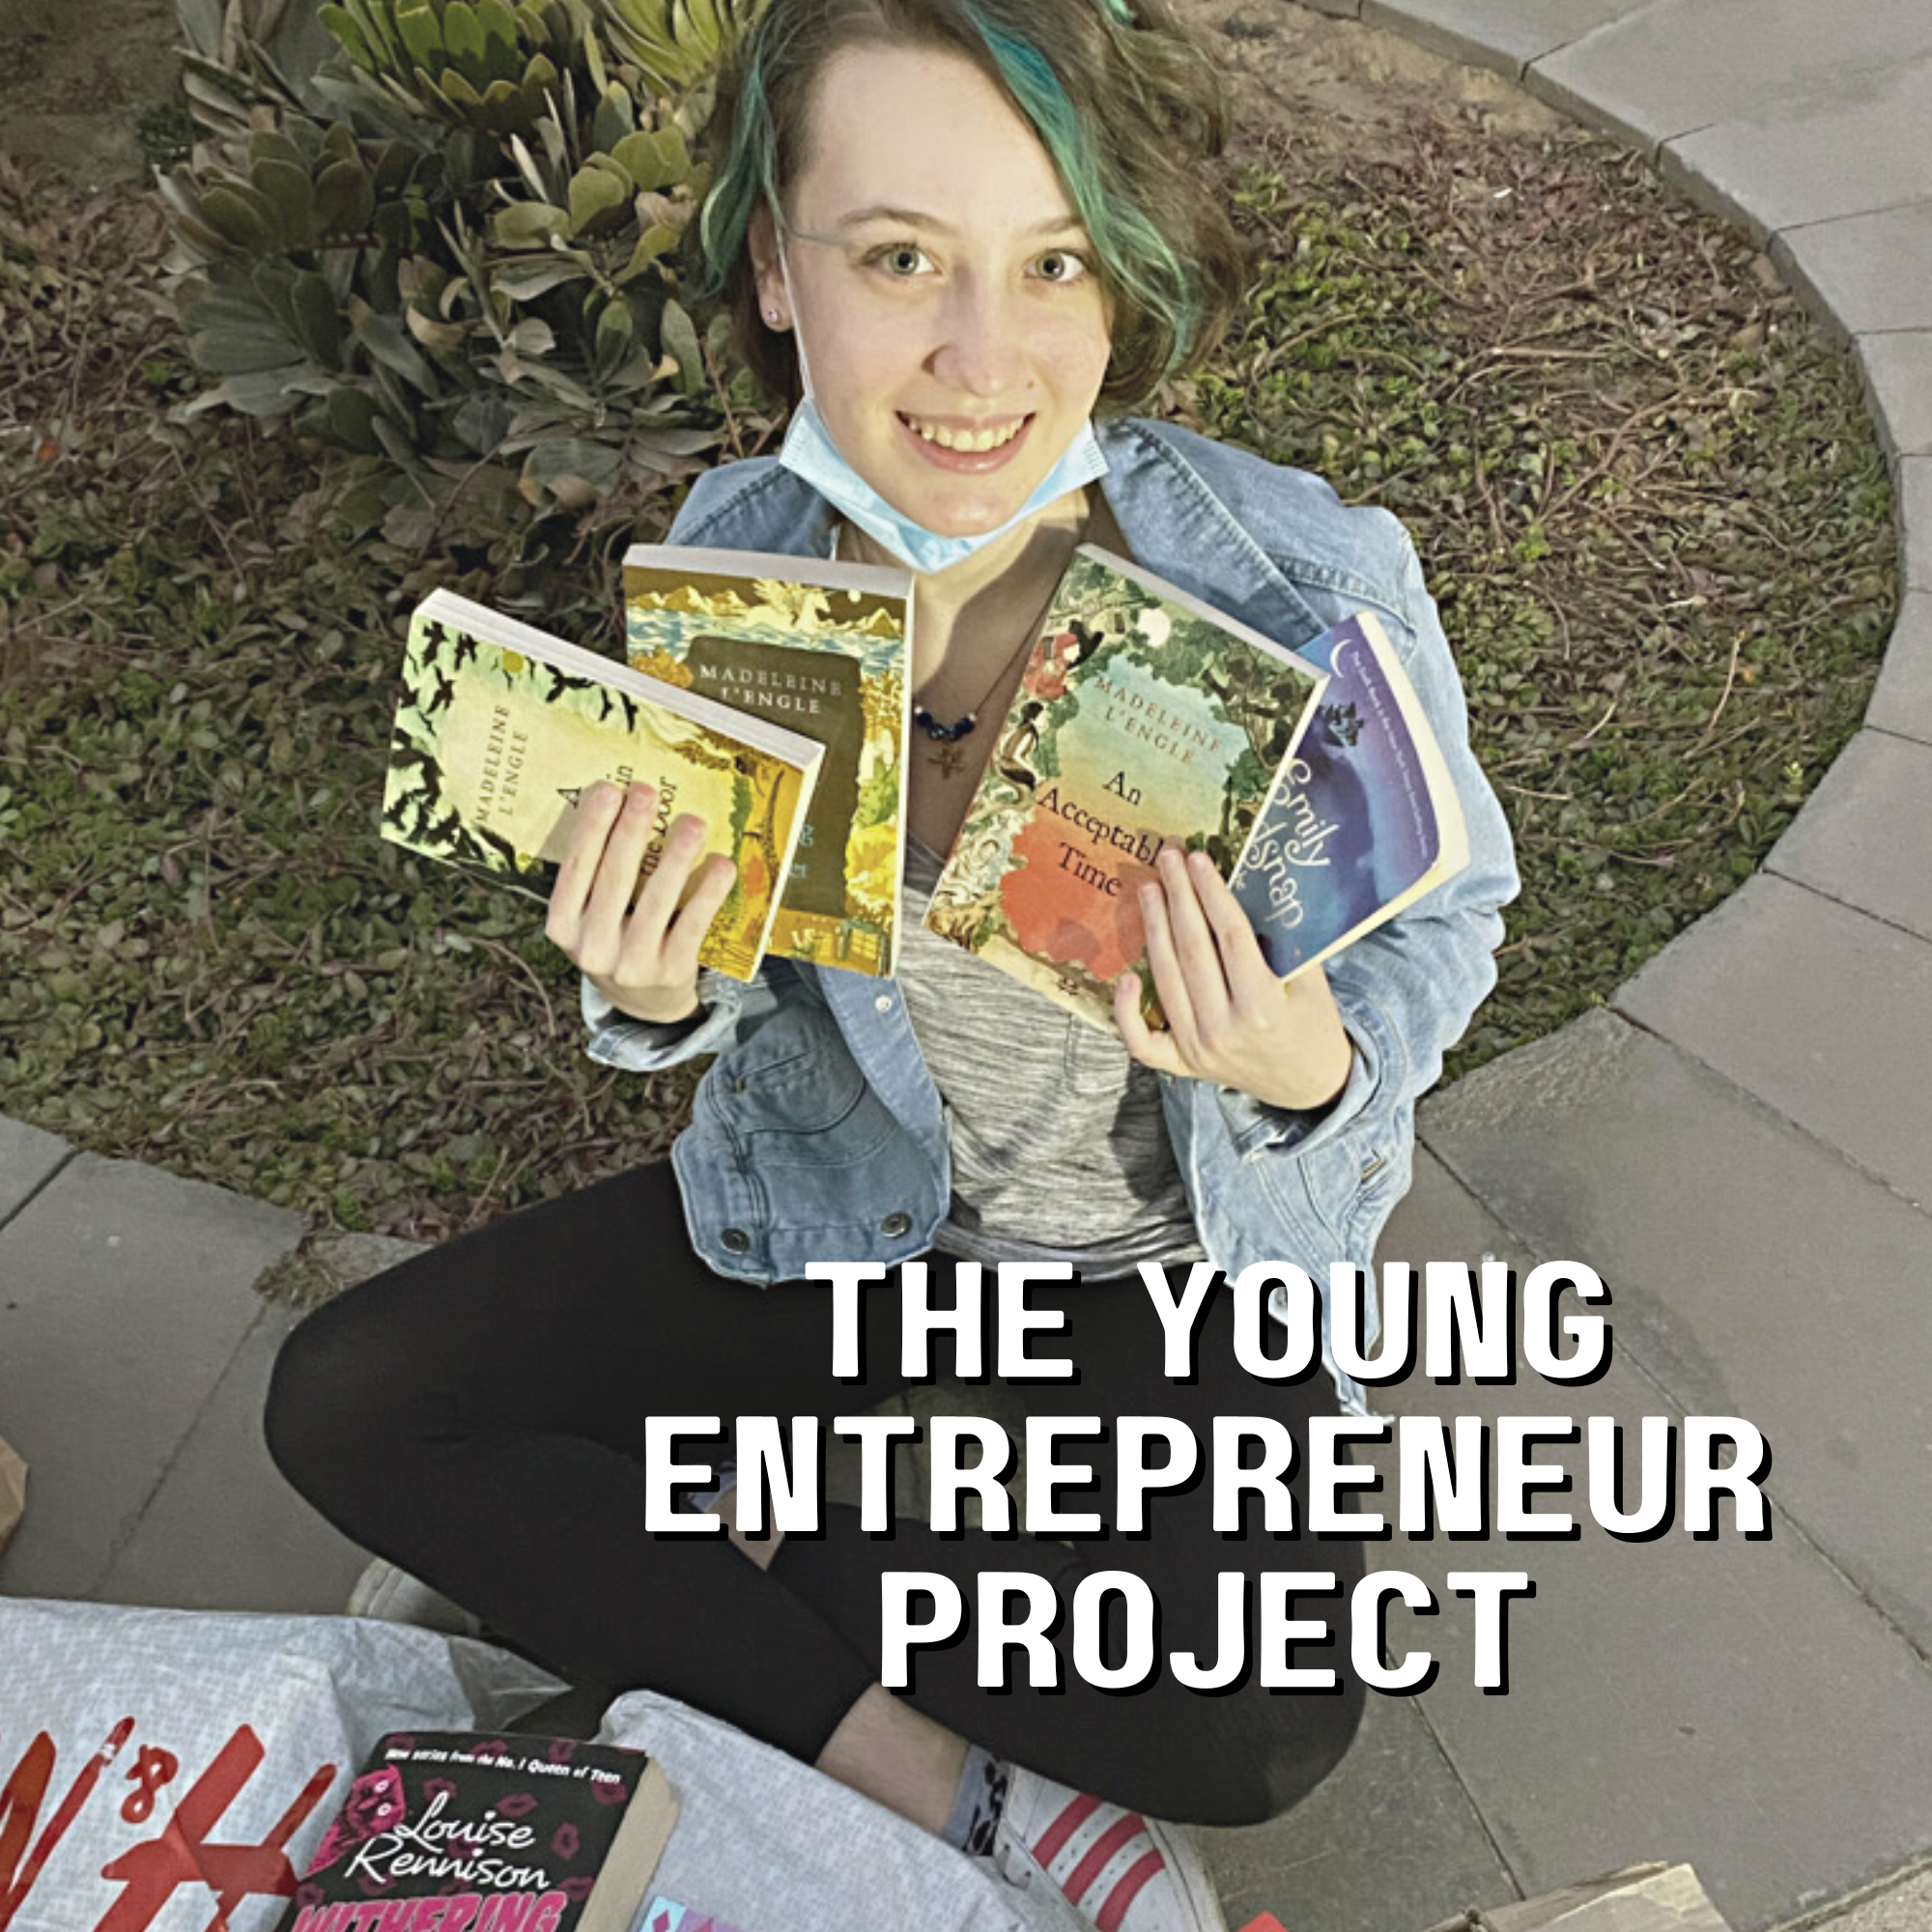 THE YOUNG ENTREPRENEUR PROJECT